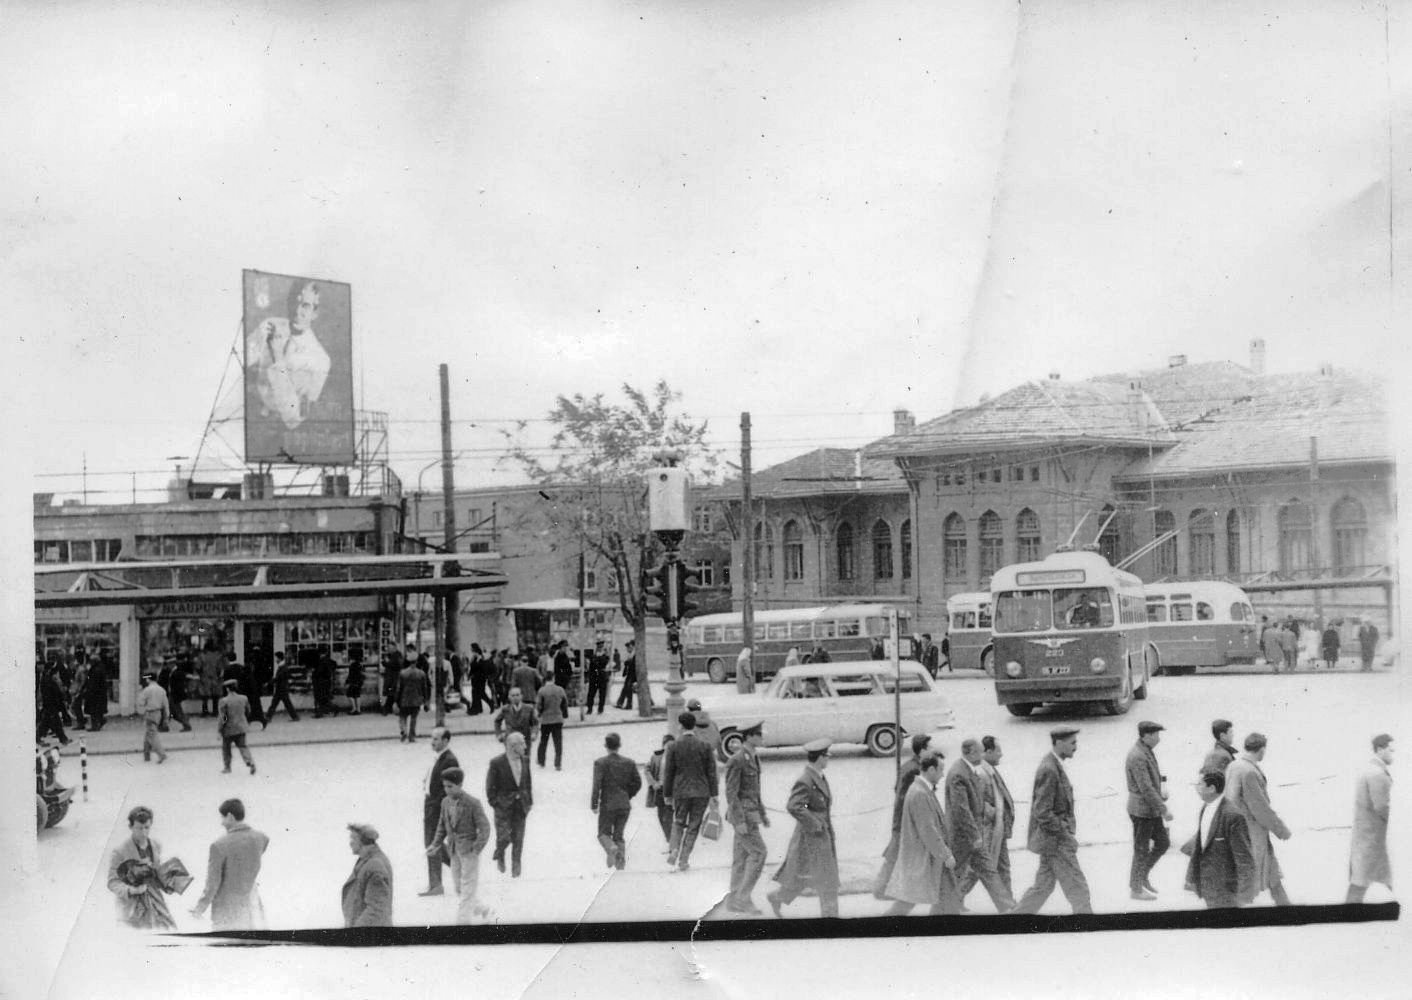 Another photo taken in Turkey 1963 when my dad was stationed there. I am thinking the billboard has to do with the 40th Annivesary of the founding of the modern country related to my previous posting. Though it seems like only men are allowed to mill around town. View full size.